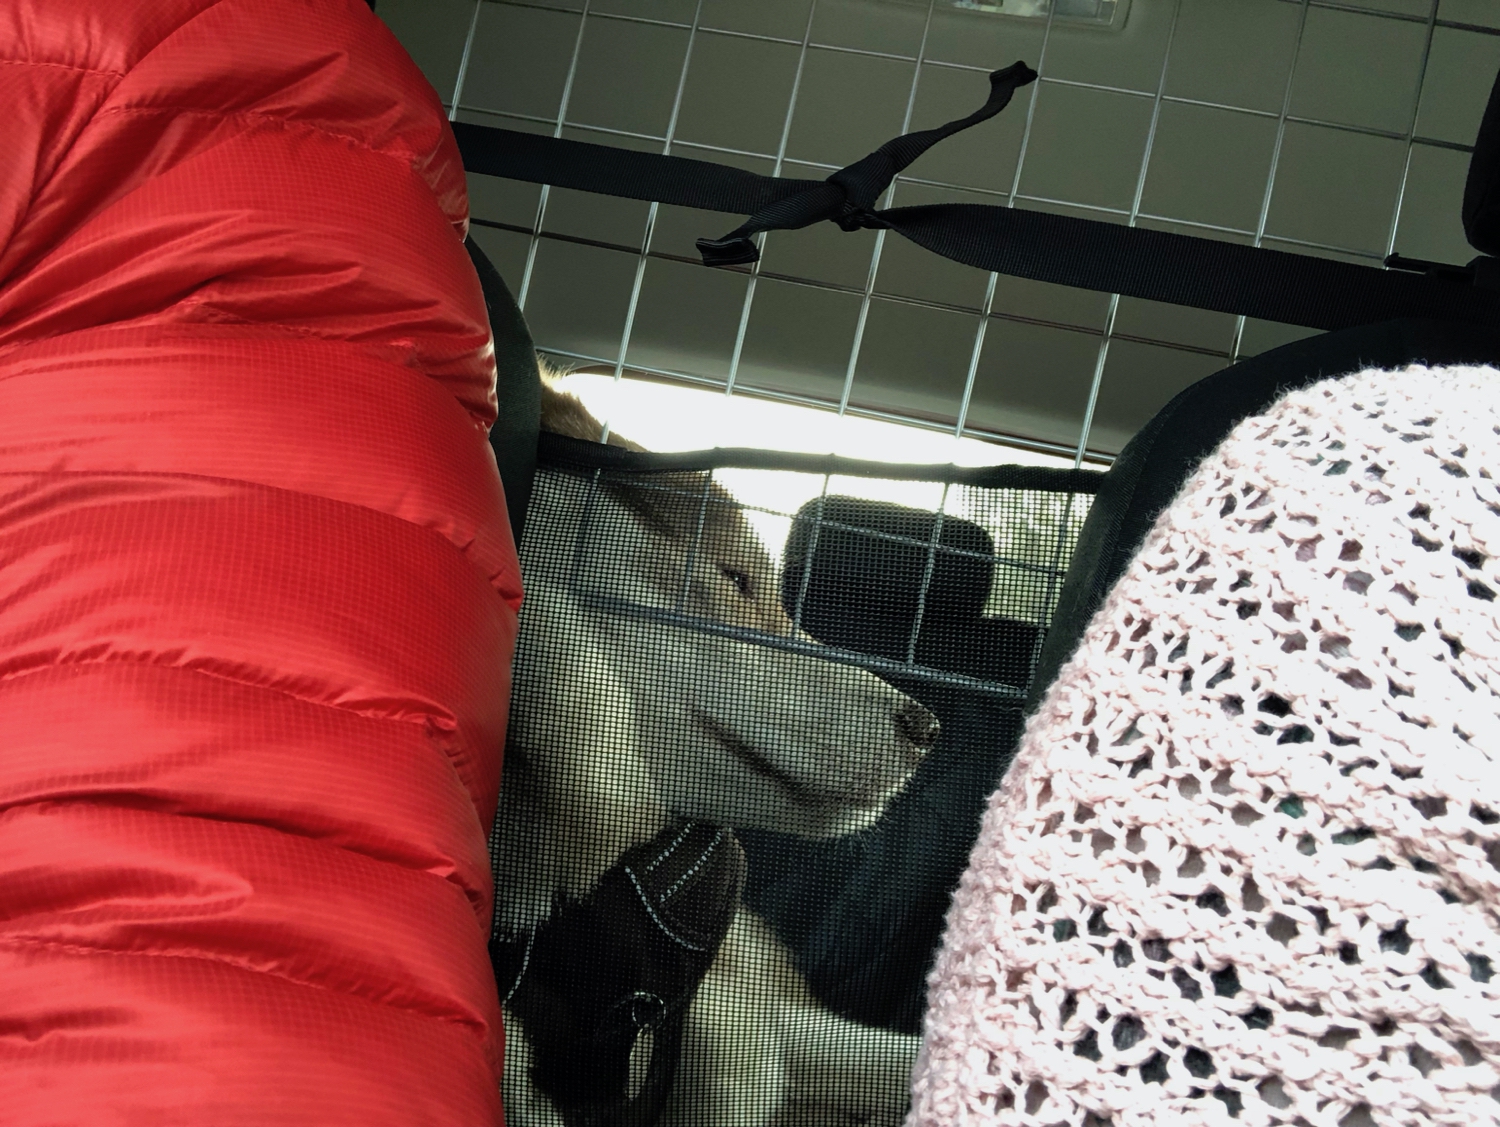 Oskar the huskamute with his face squished up against the dog guard in the back of the car.